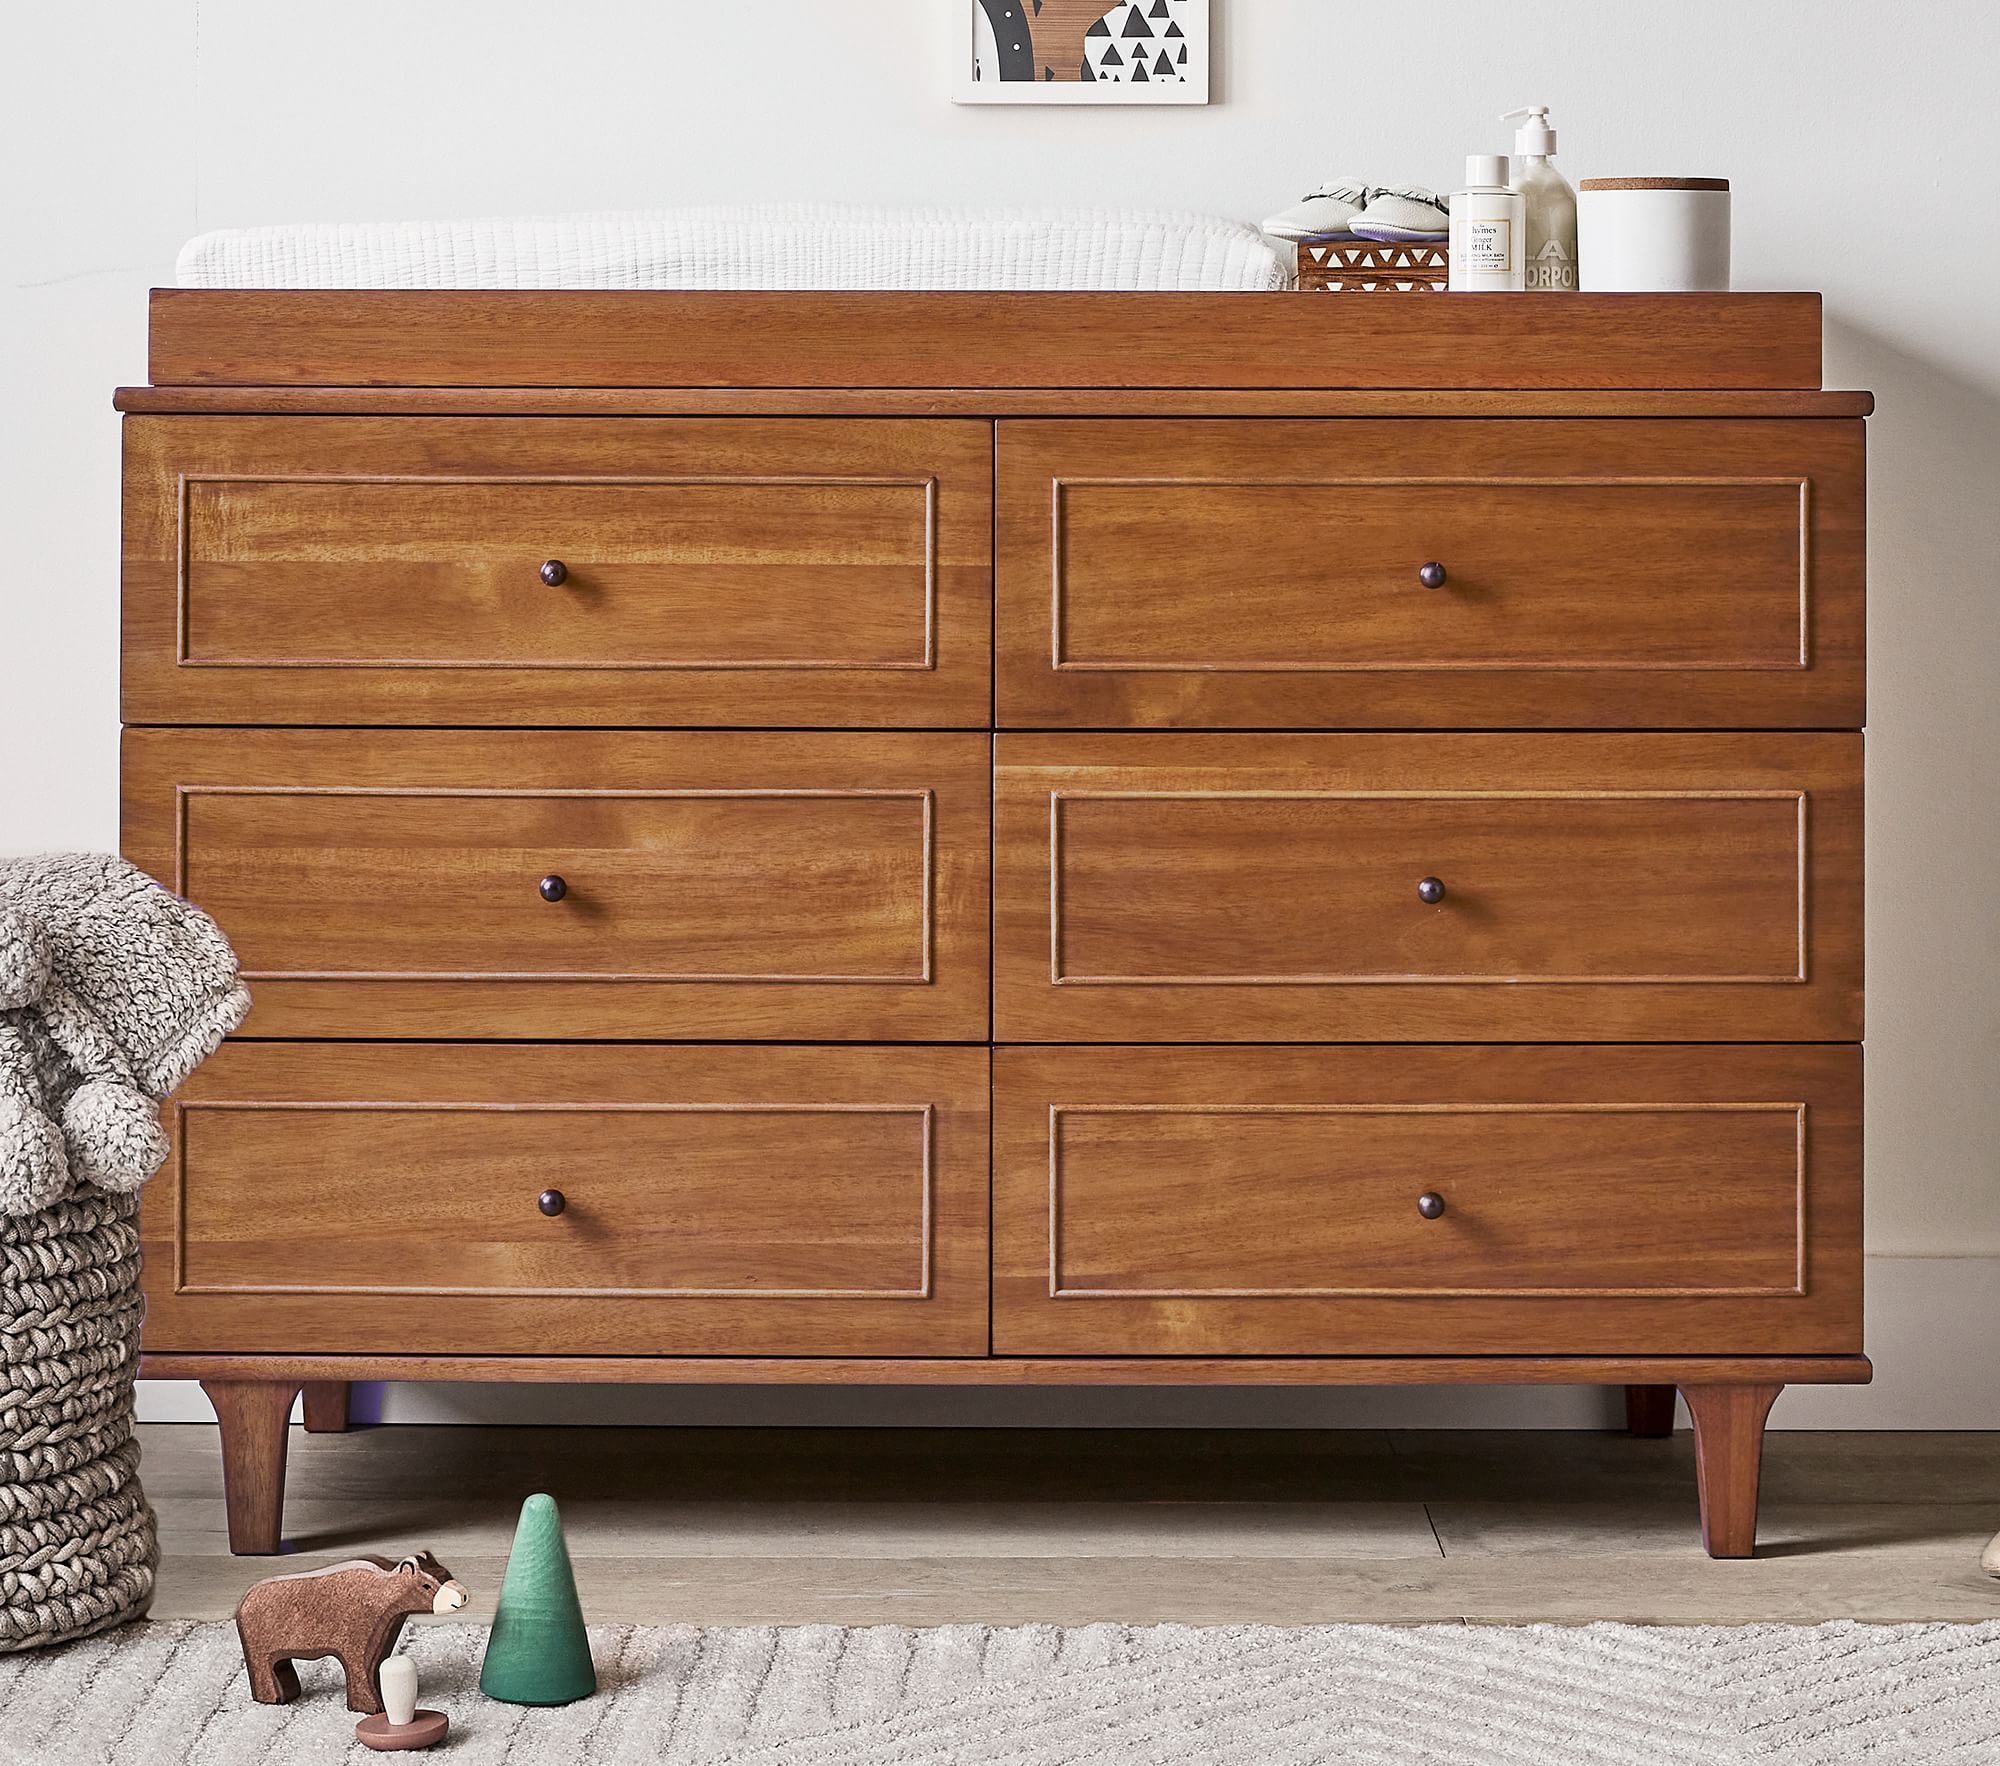 Dawson Extra-Wide Nursery Dresser & Topper Set, Acorn, In-Home Delivery - Image 1